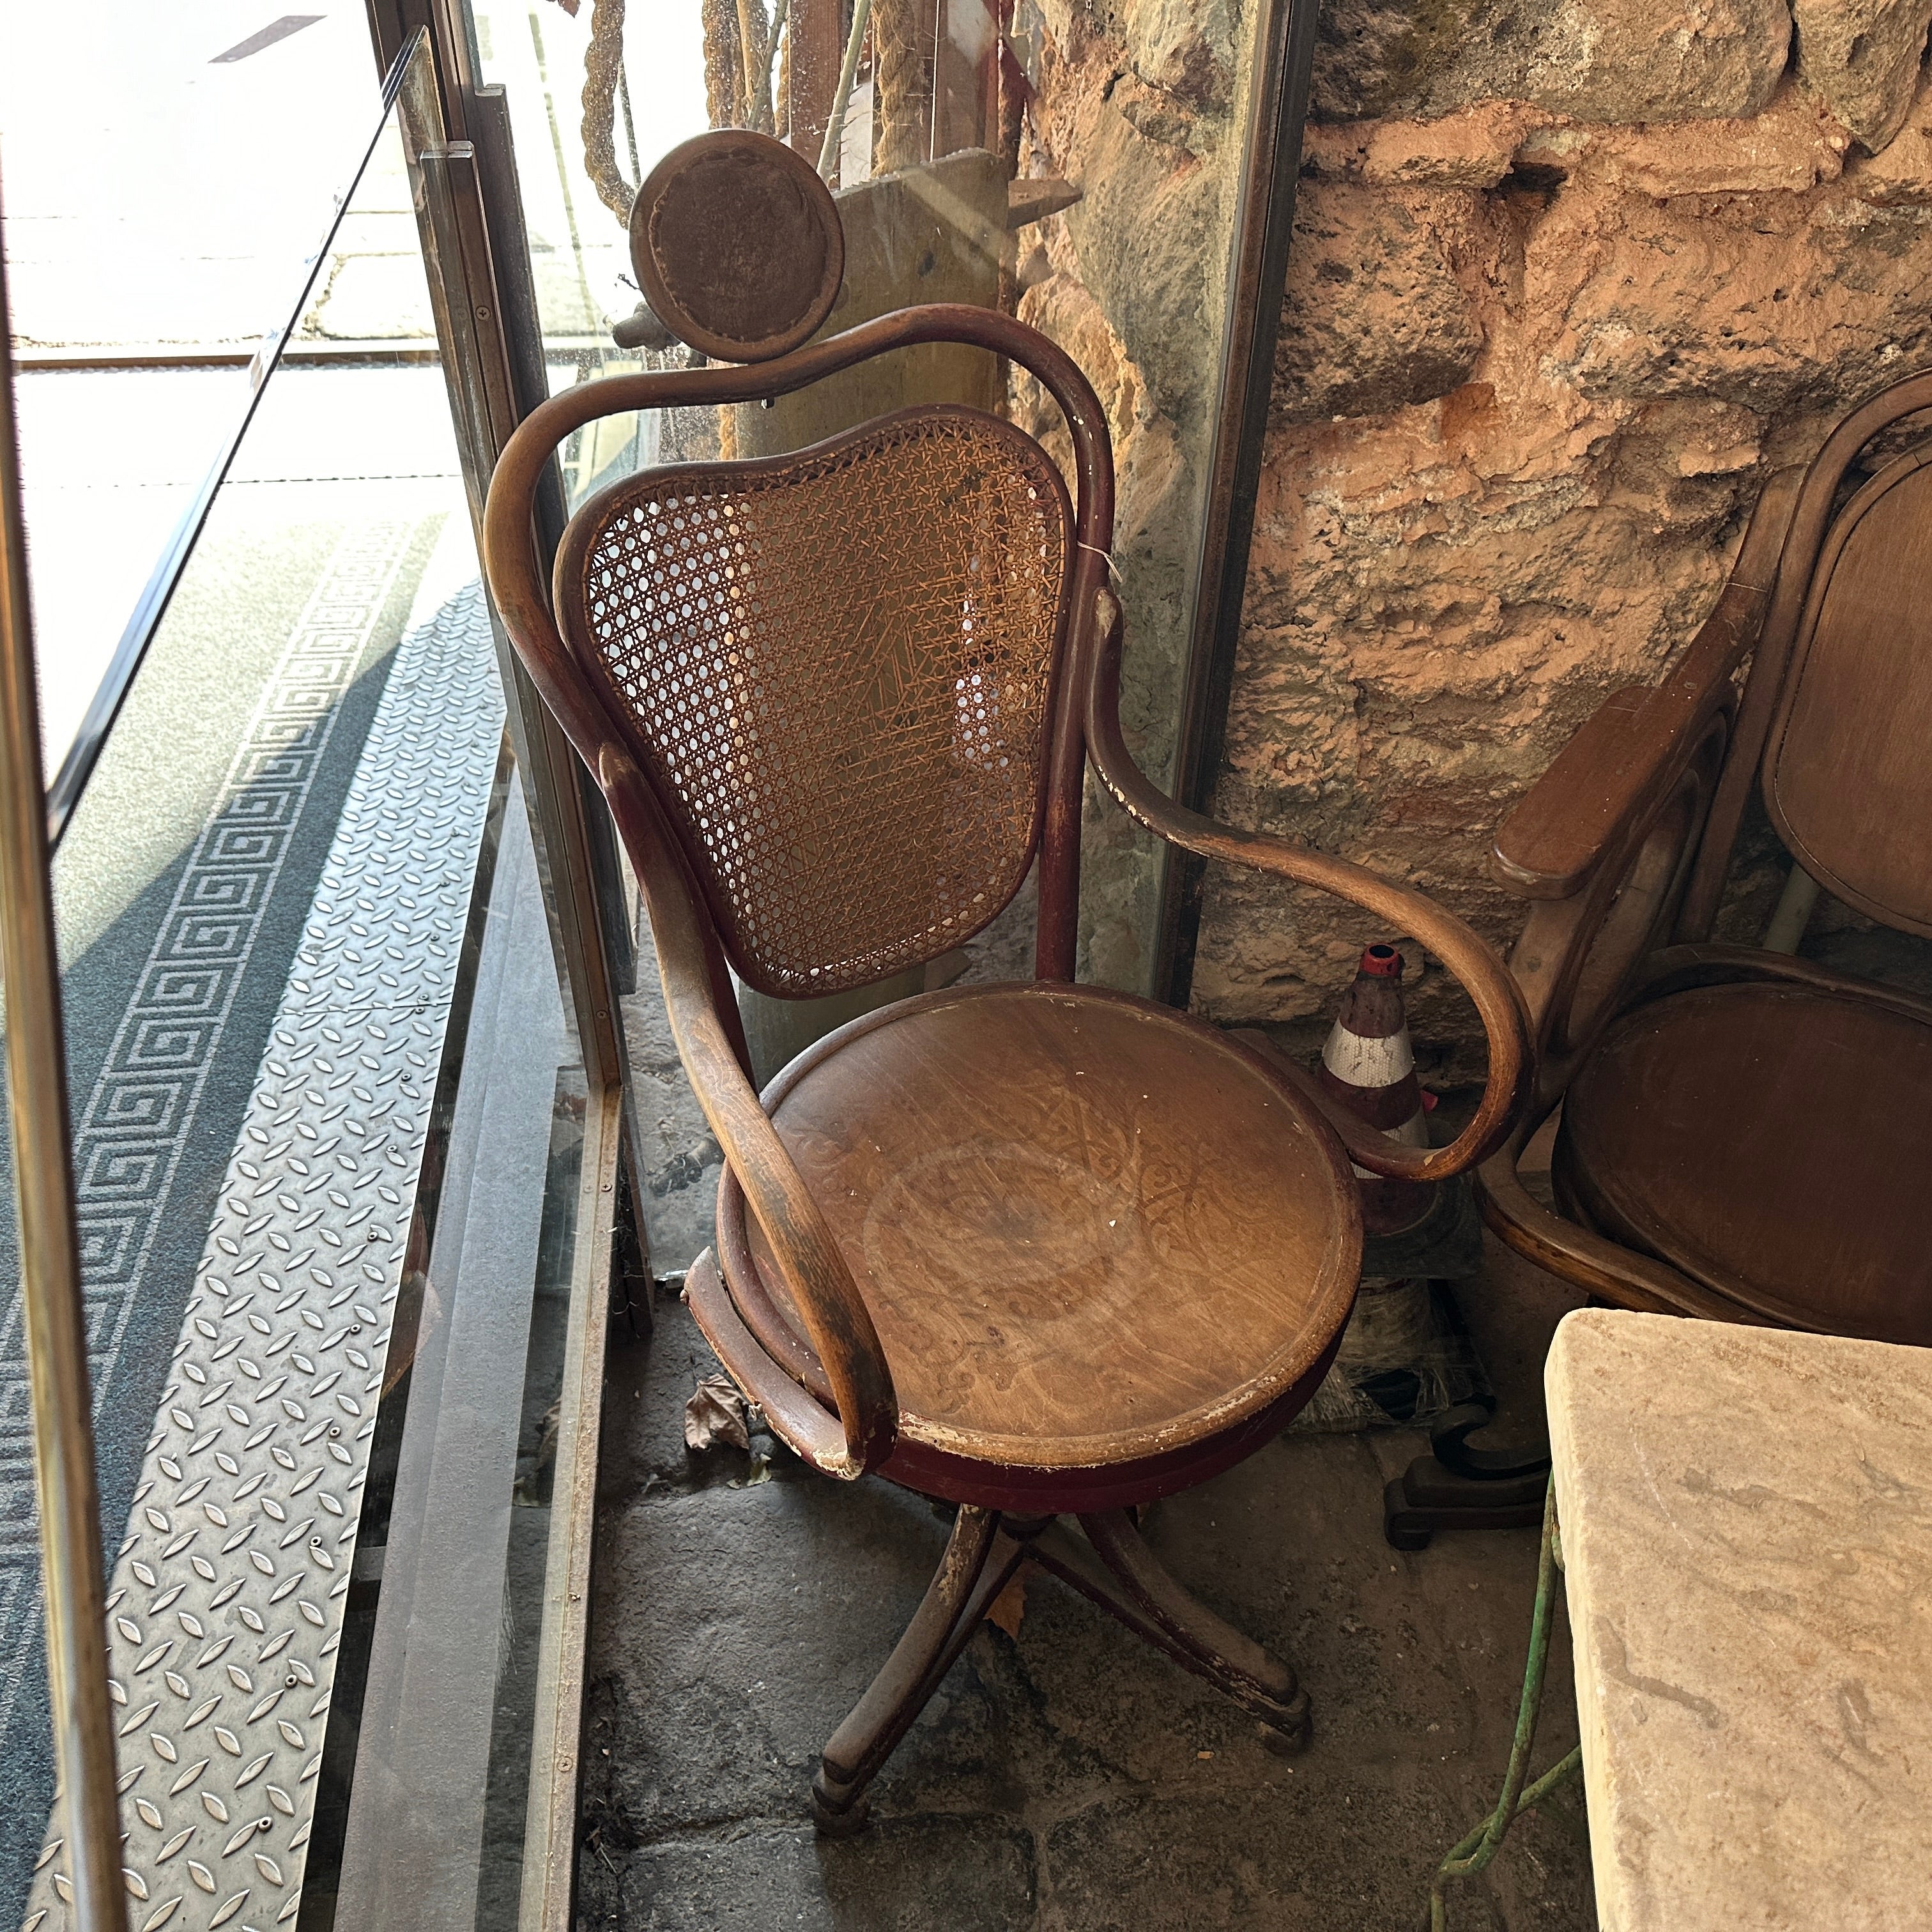 An early 20th Century Antique swivel Barber Chair hand-crafted in Italy. Wood and Wicker are in orginal condition and needs restoration. It has been hand-carved and crafted in Palermo in Sicily. This Chair is a stunning example of craftsmanship and